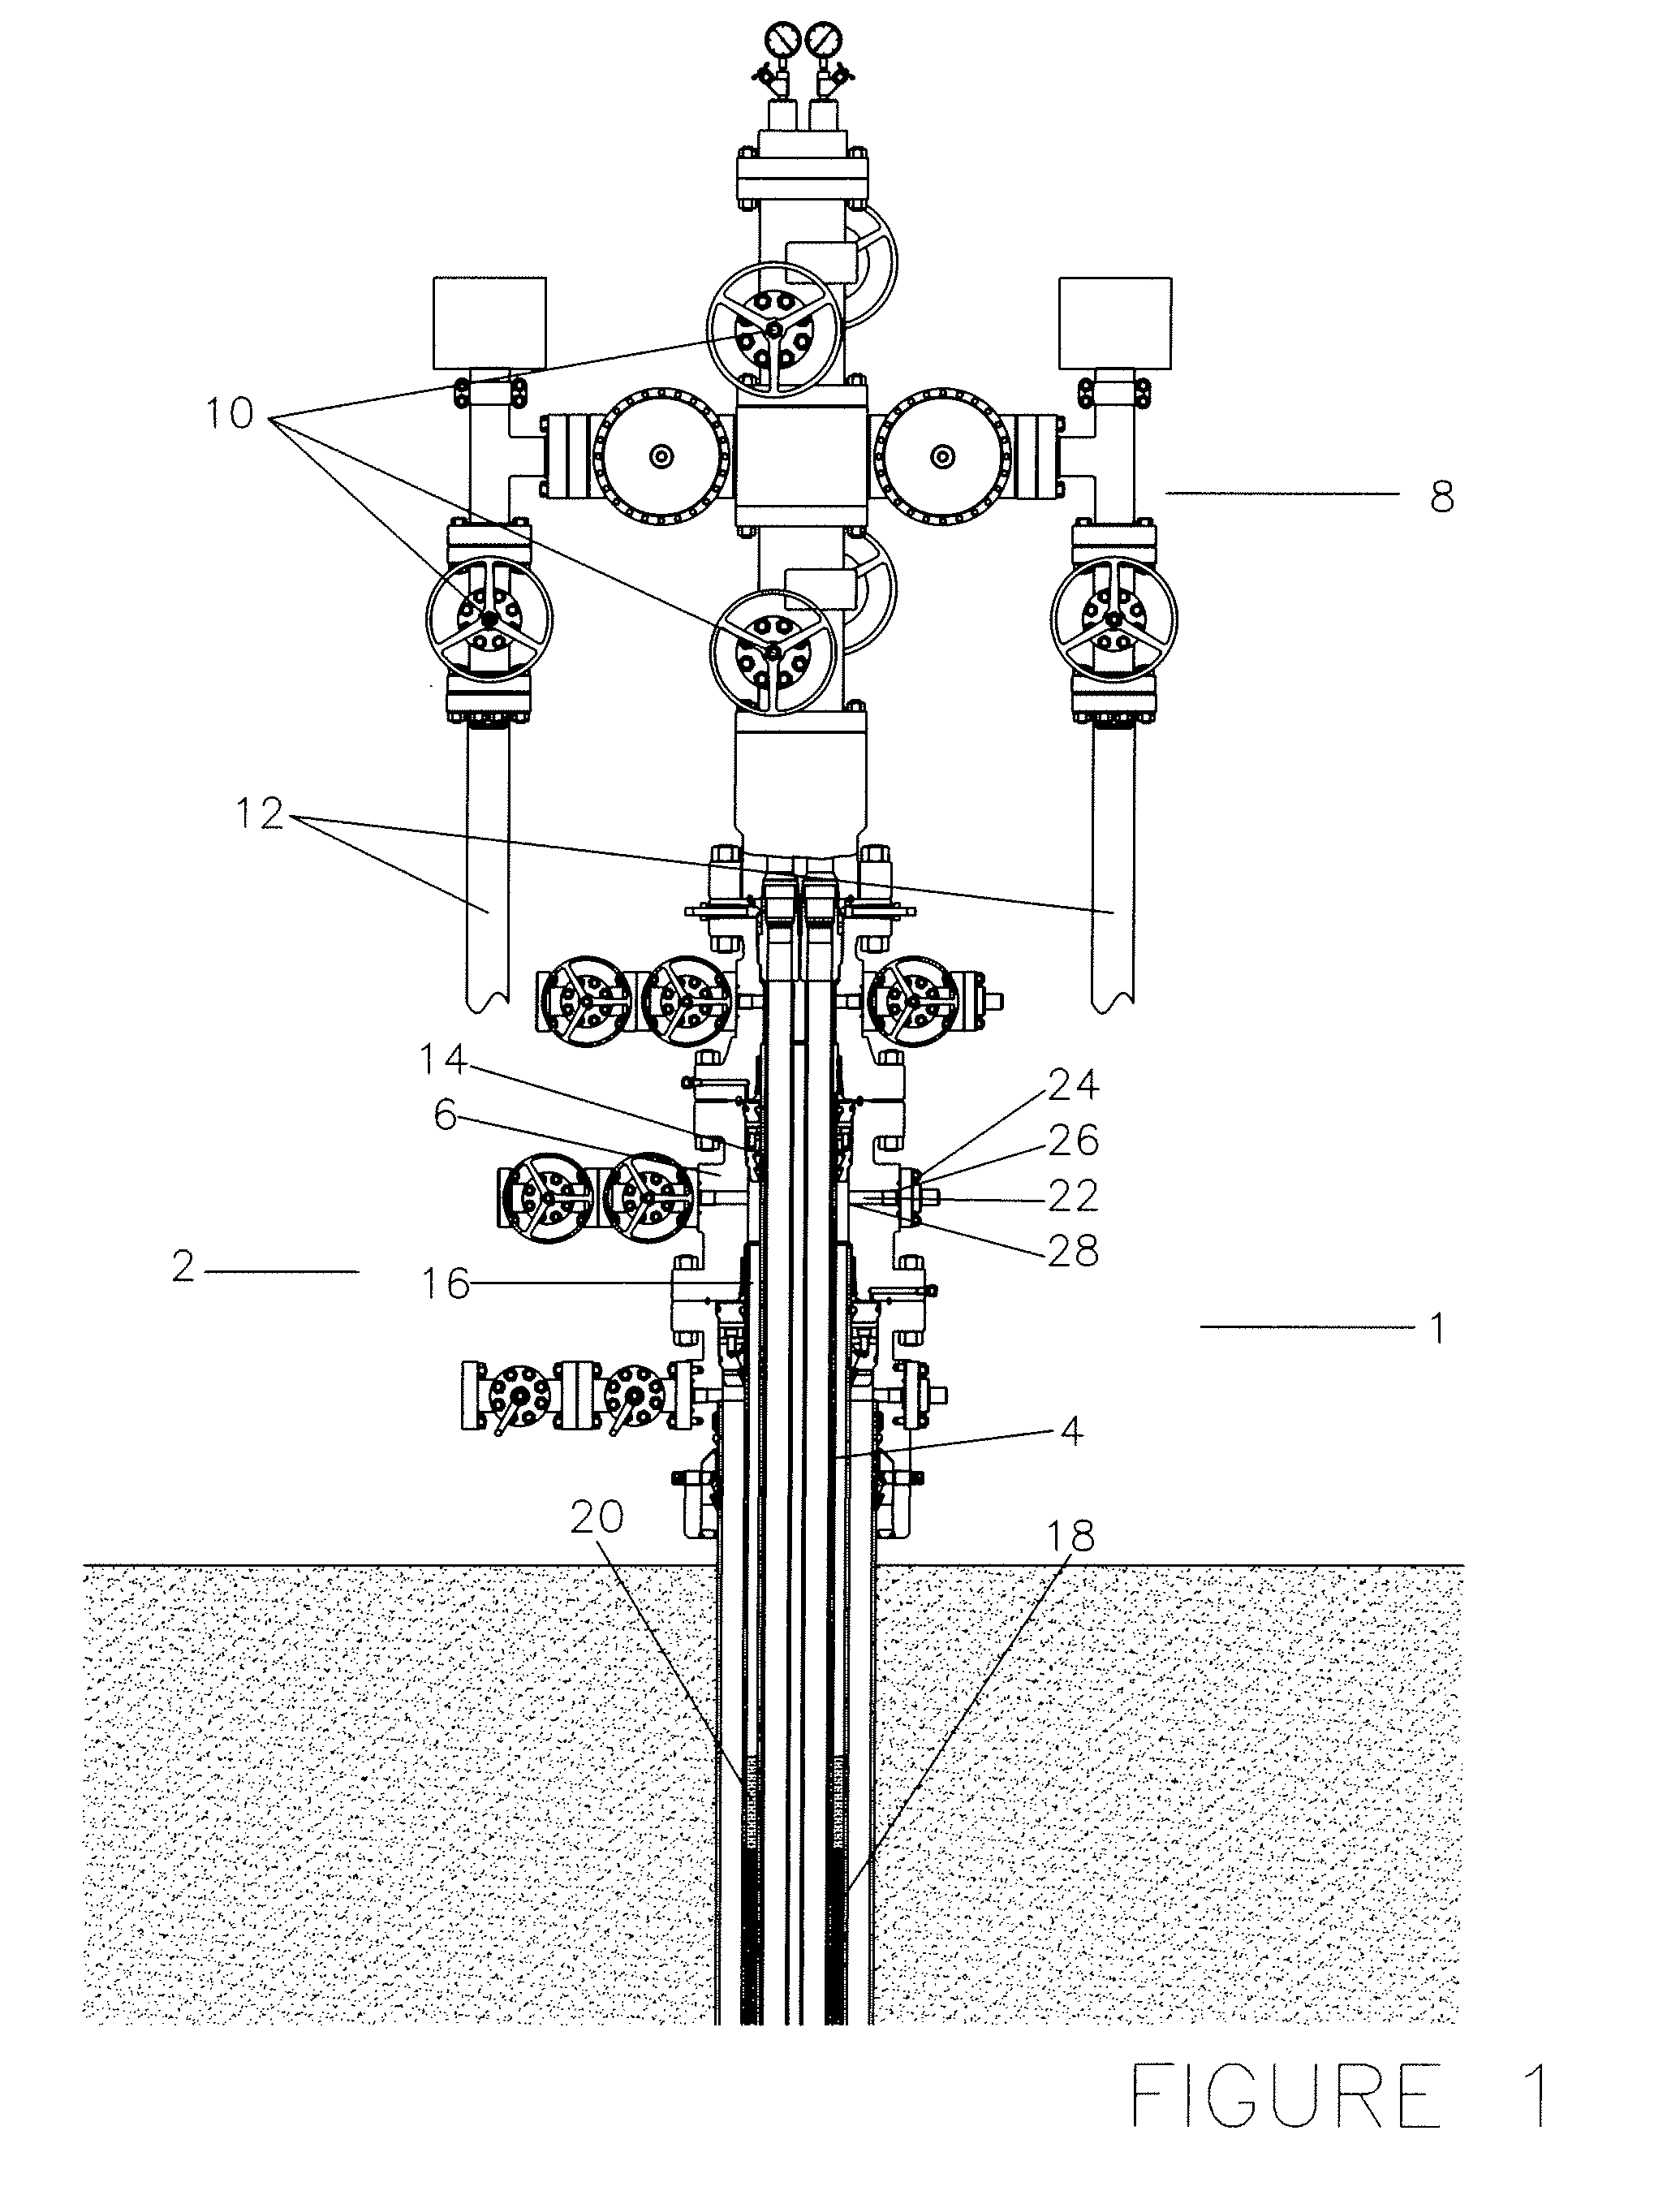 System and method of displacing fluids in an annulus